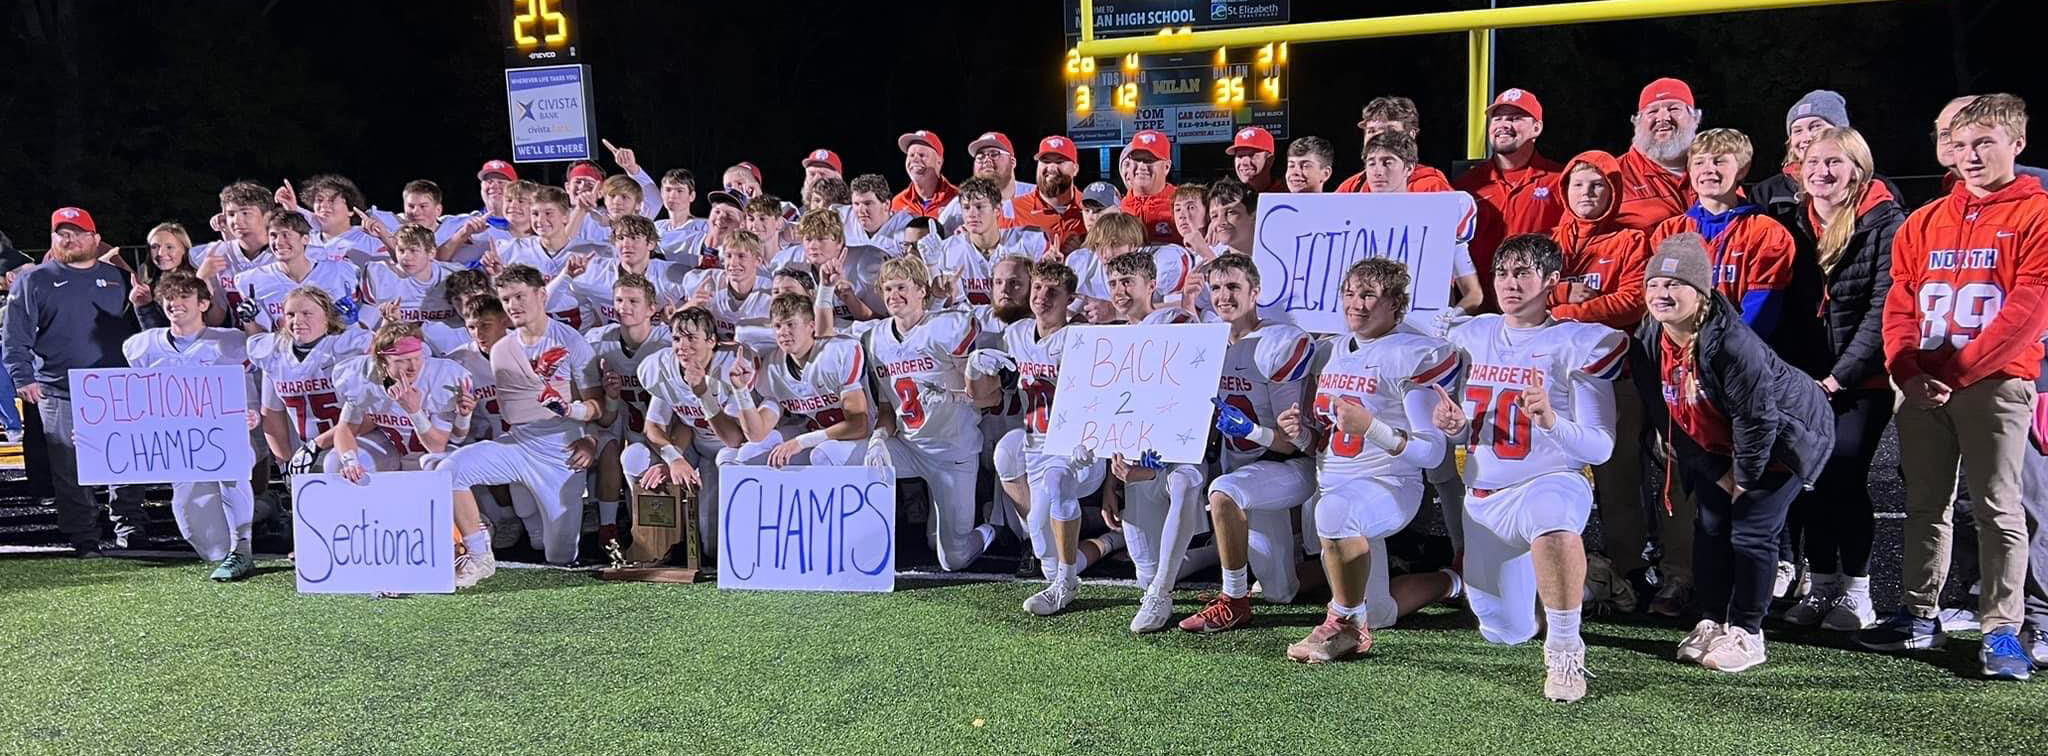 North Decatur Chargers Win Football Sectional Championship for Second Consecutive Year